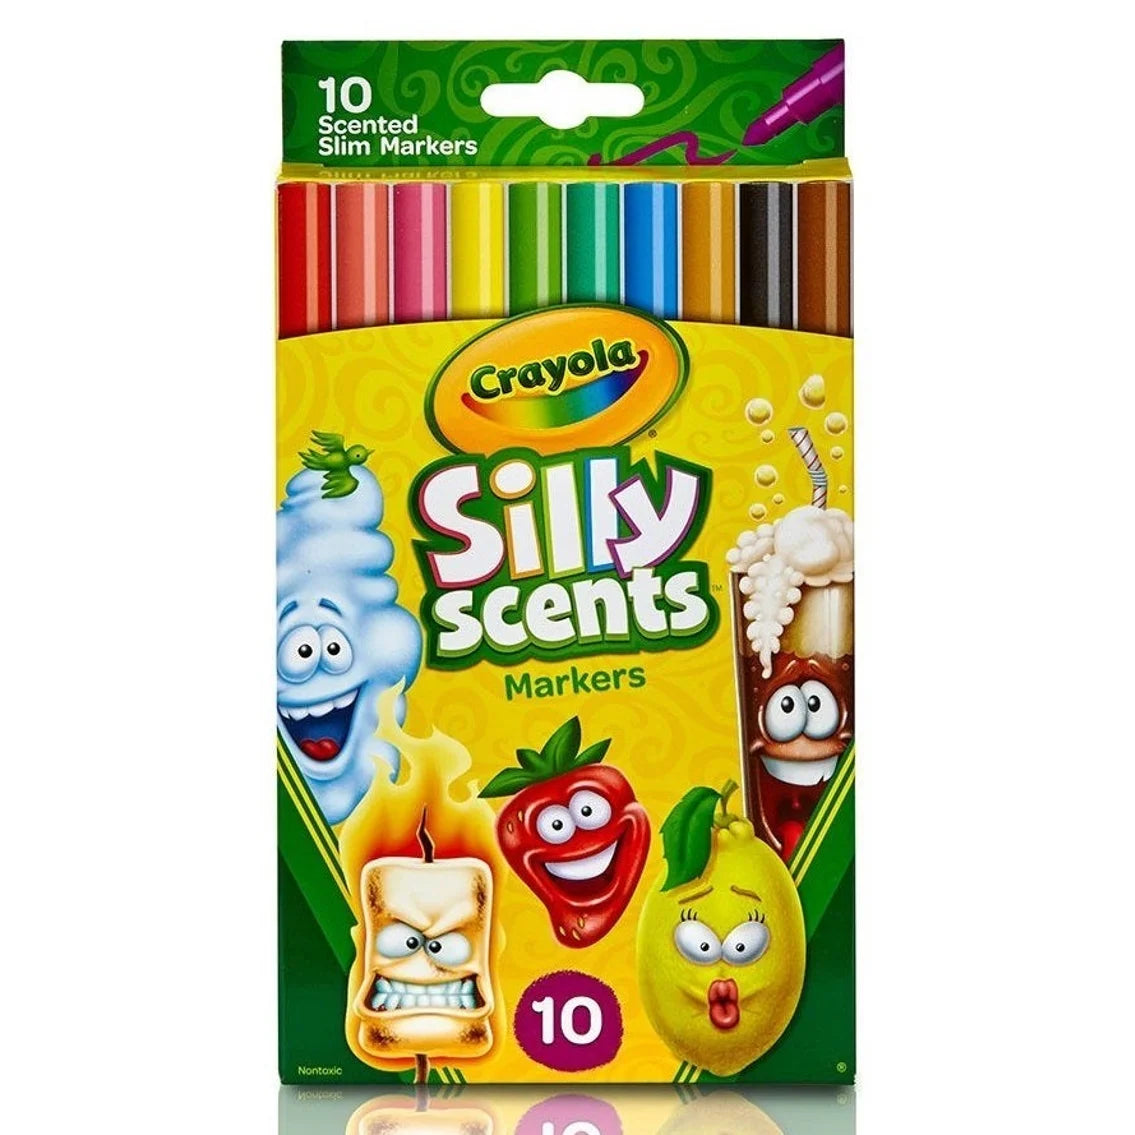 Crayola Silly Scents Slim Markers 10pk (7696117039303)